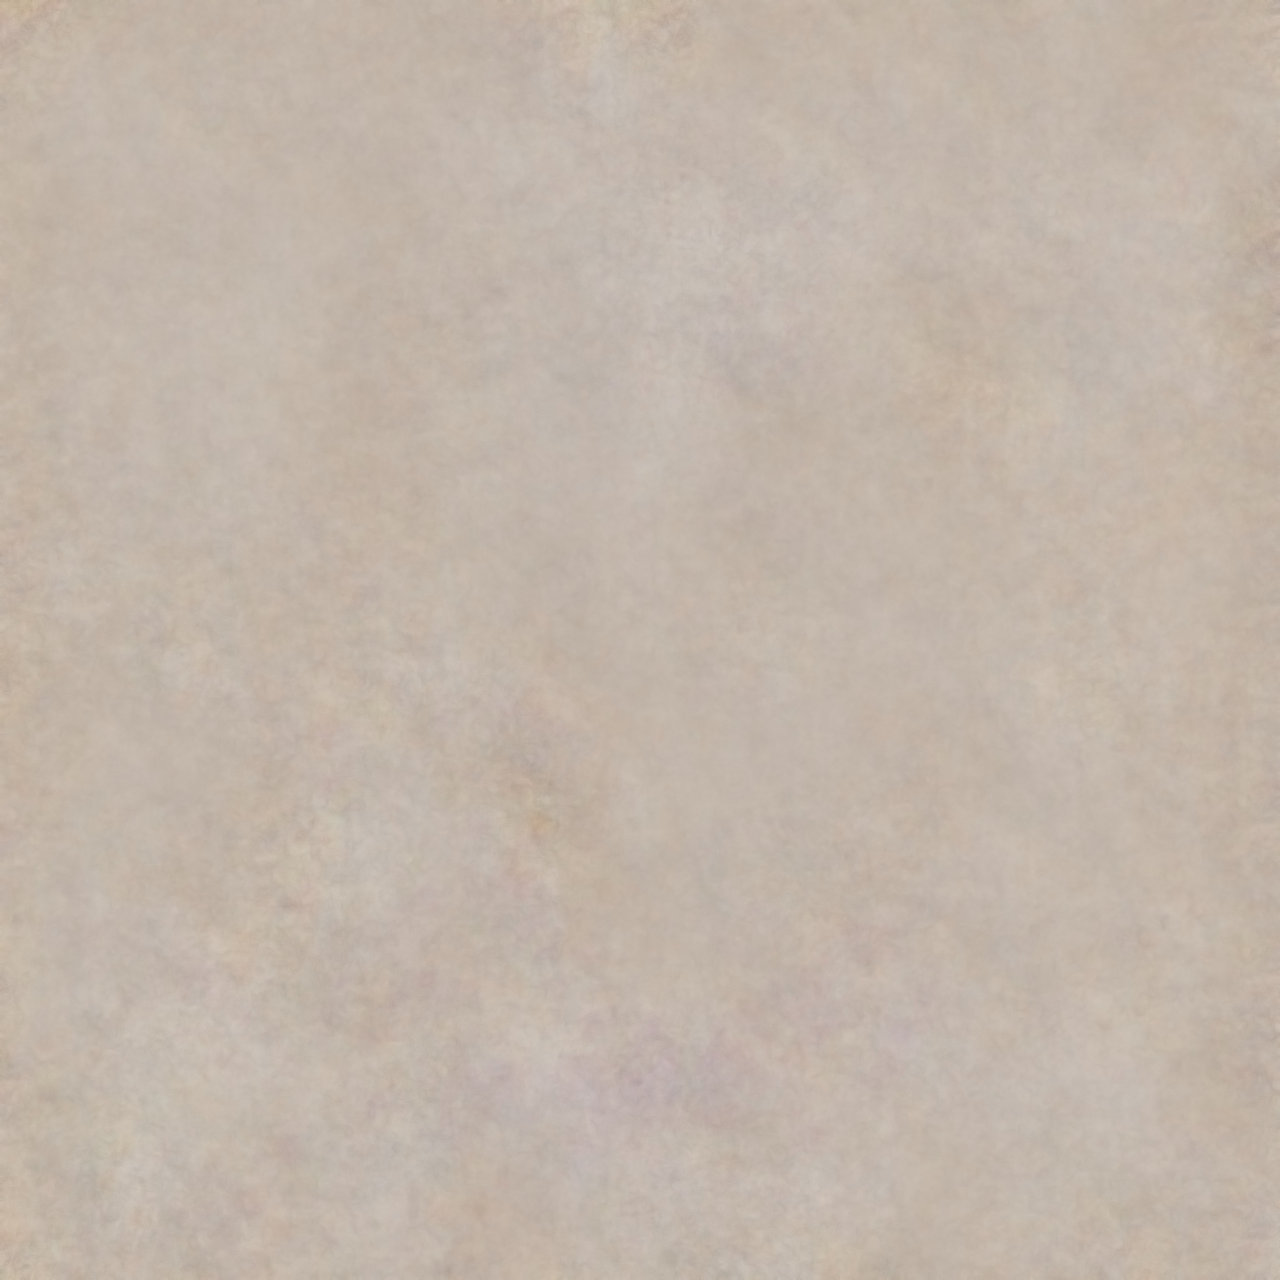 Background 5 Neutral Taupe TExture by DonnaMarie113 on